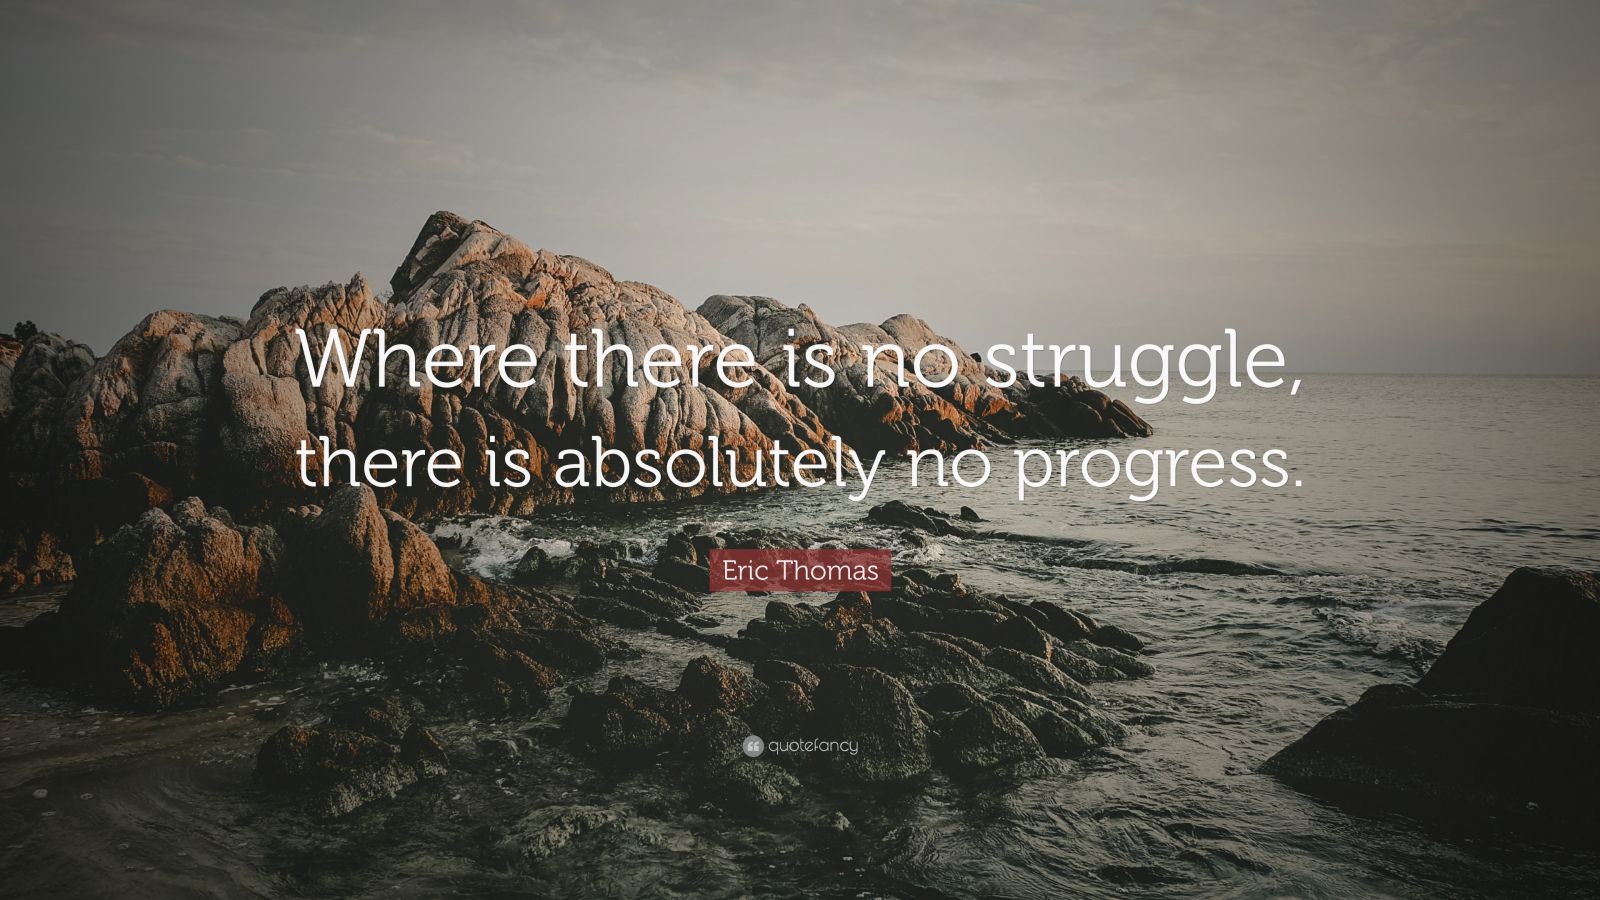 Eric Thomas Quote: “Where there is no struggle, there is absolutely no ...